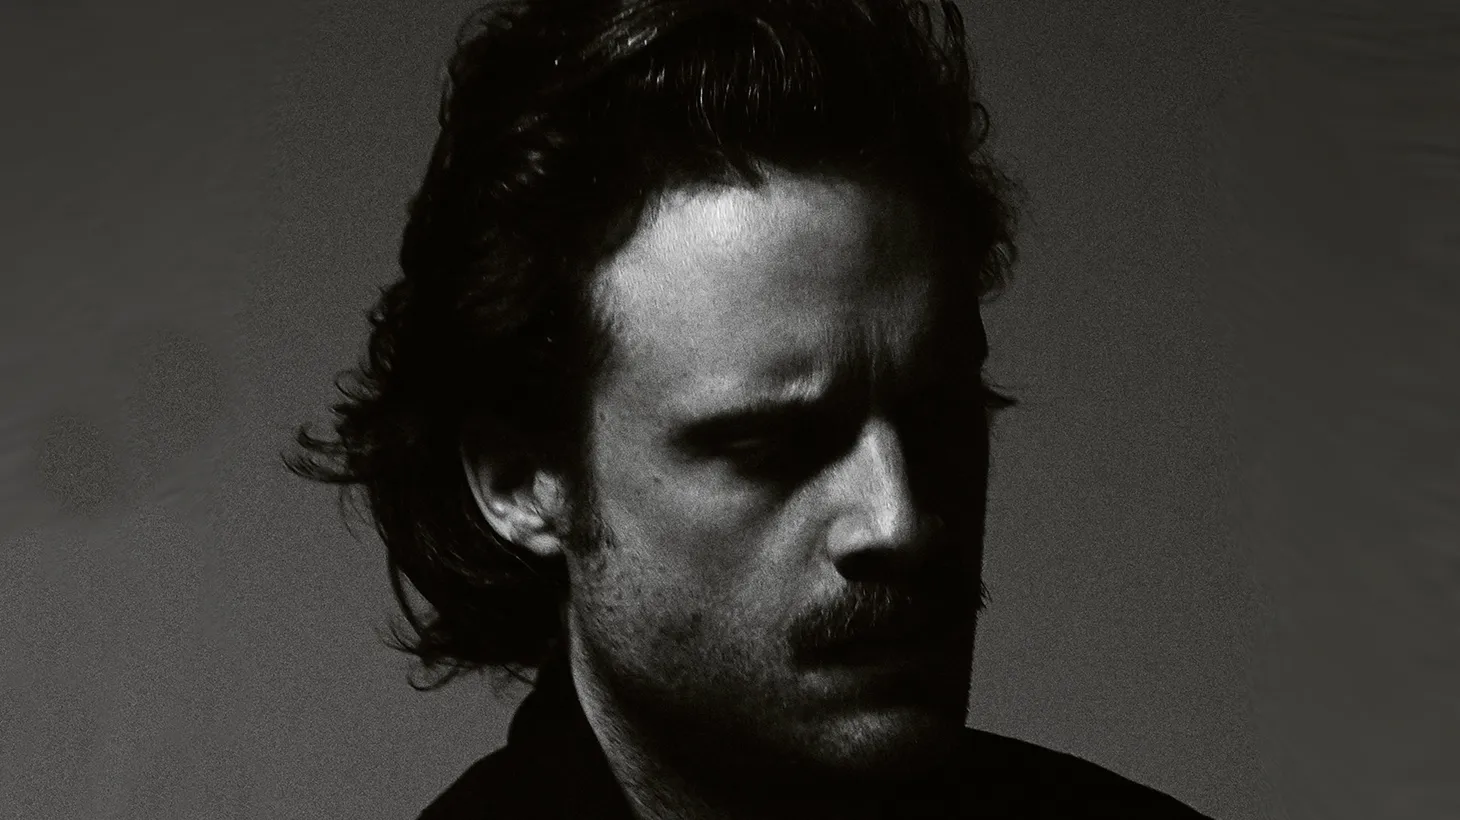 Father John Misty joins us at 10am on the release day for Pure Comedy.